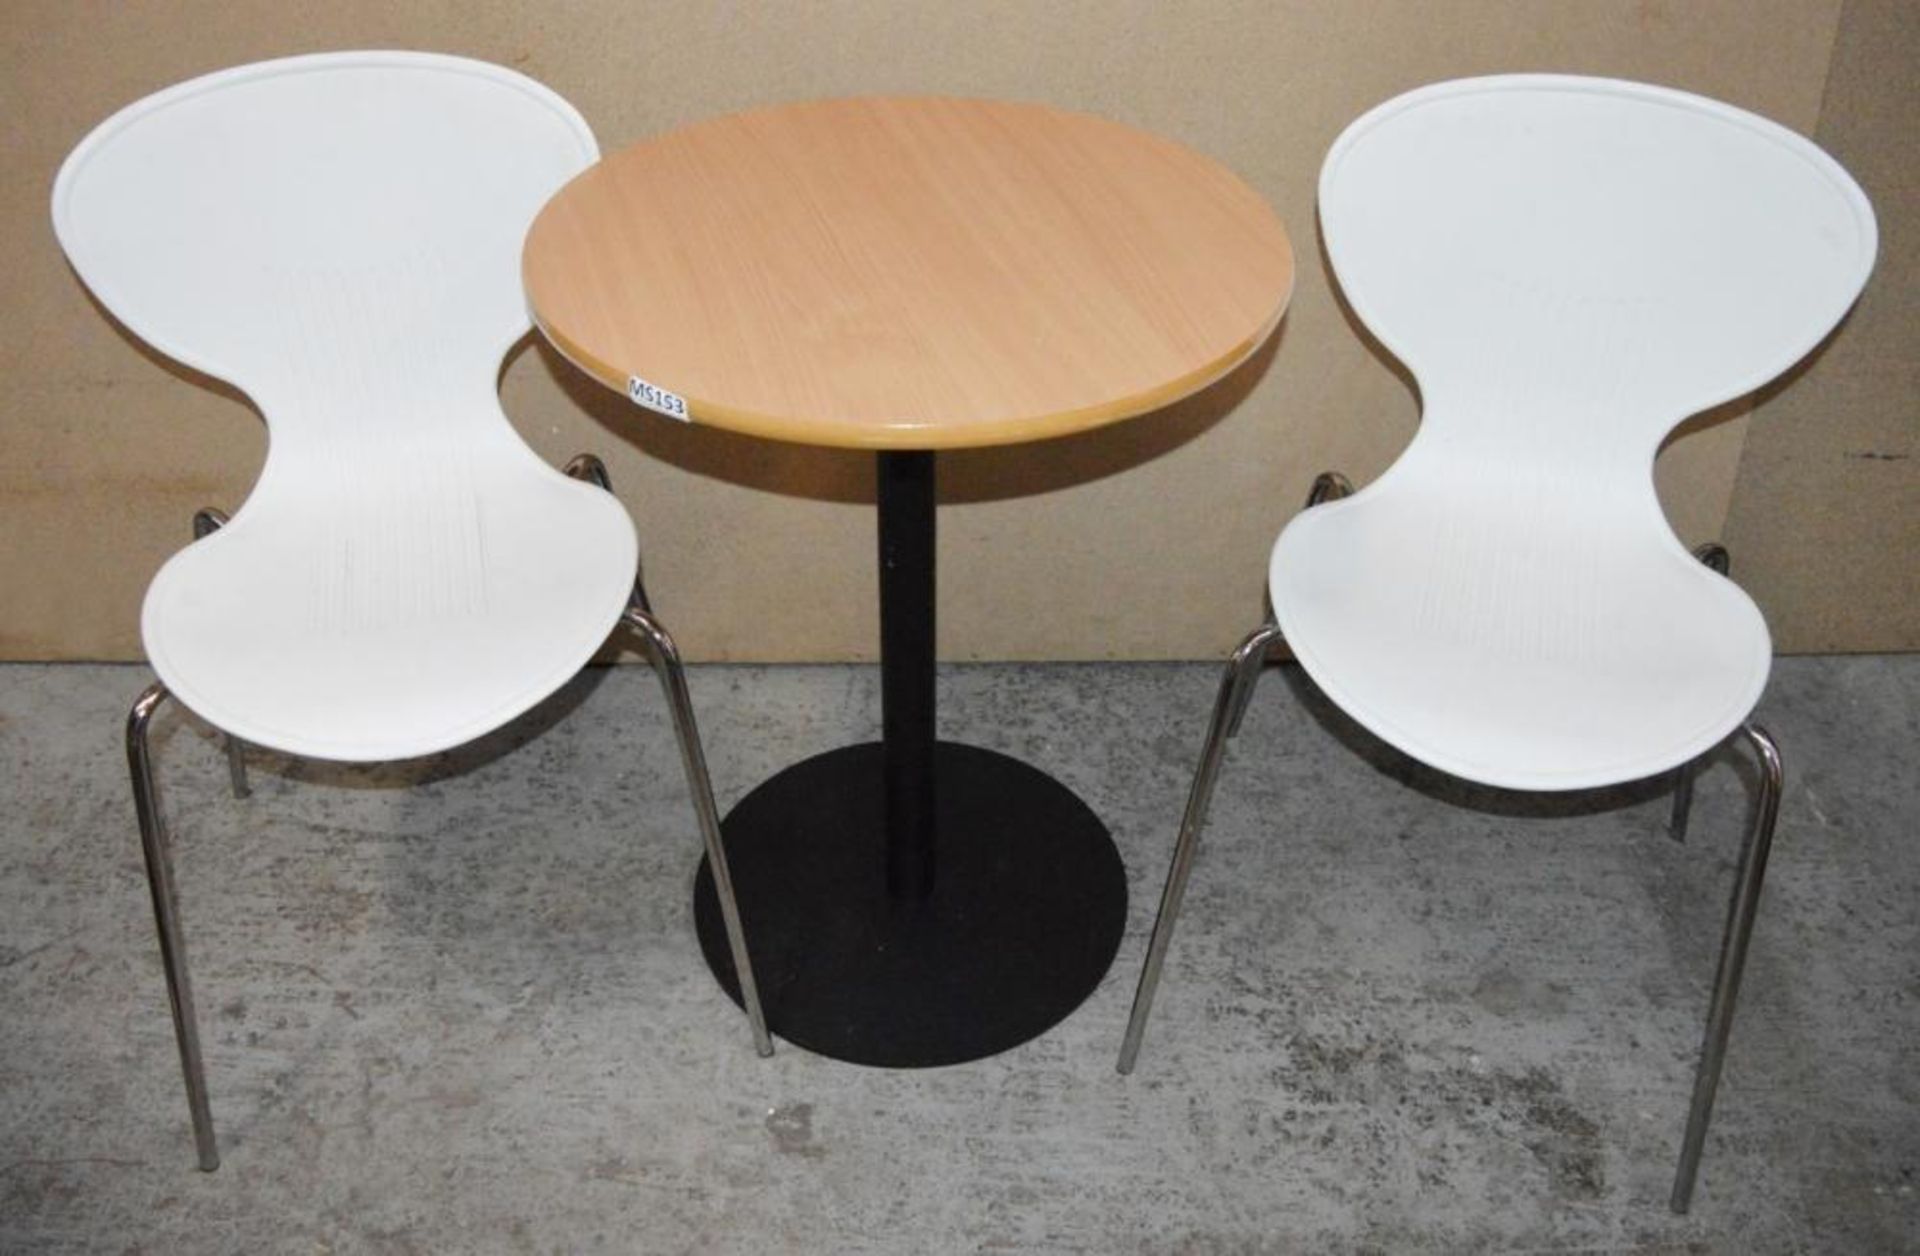 1 x Canteen Table and Chair Set - Includes Single Pedestal Table With Beech Top and Four Matching